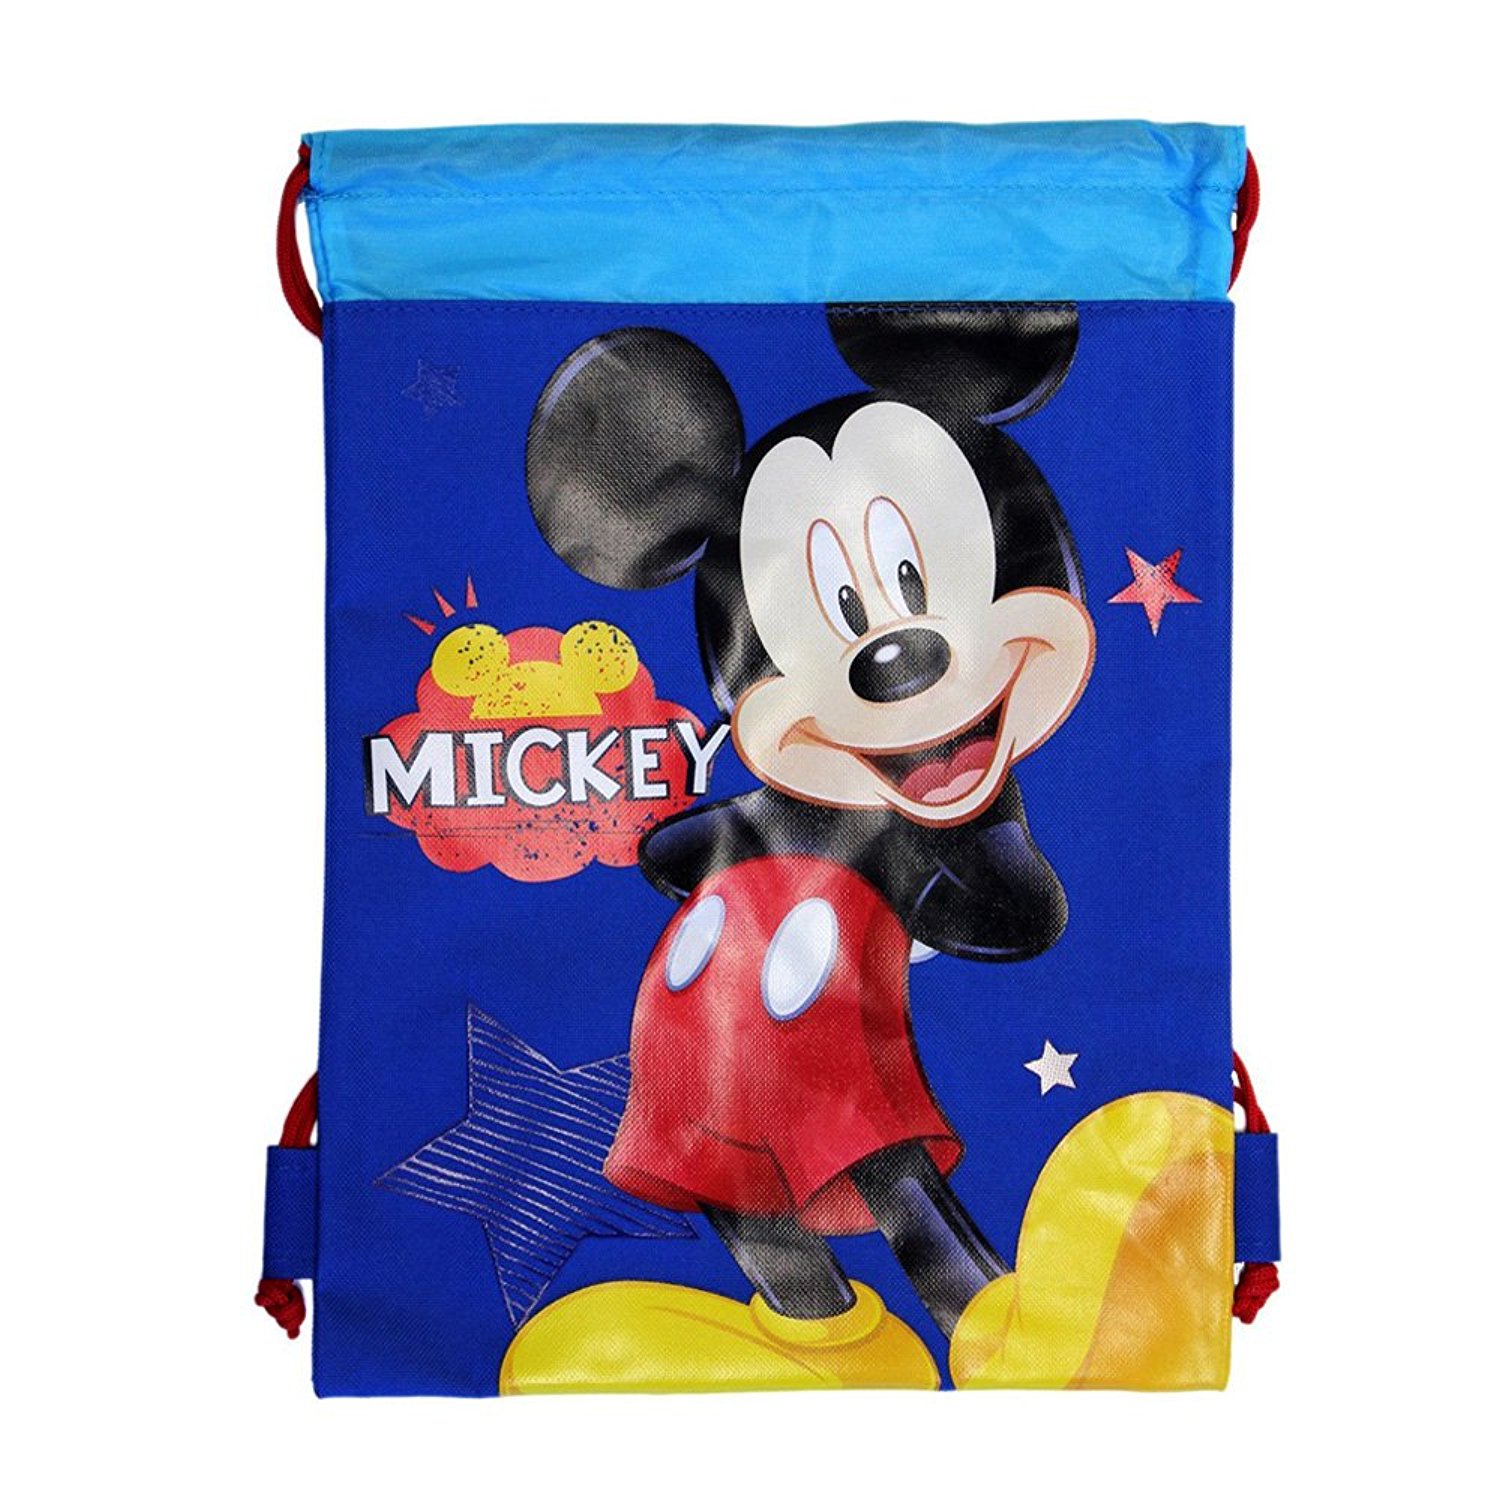 Mickey & Minnie Mouse Drawstring Backpack - Large Drawsting Bags Set Of 2 - image 3 of 3